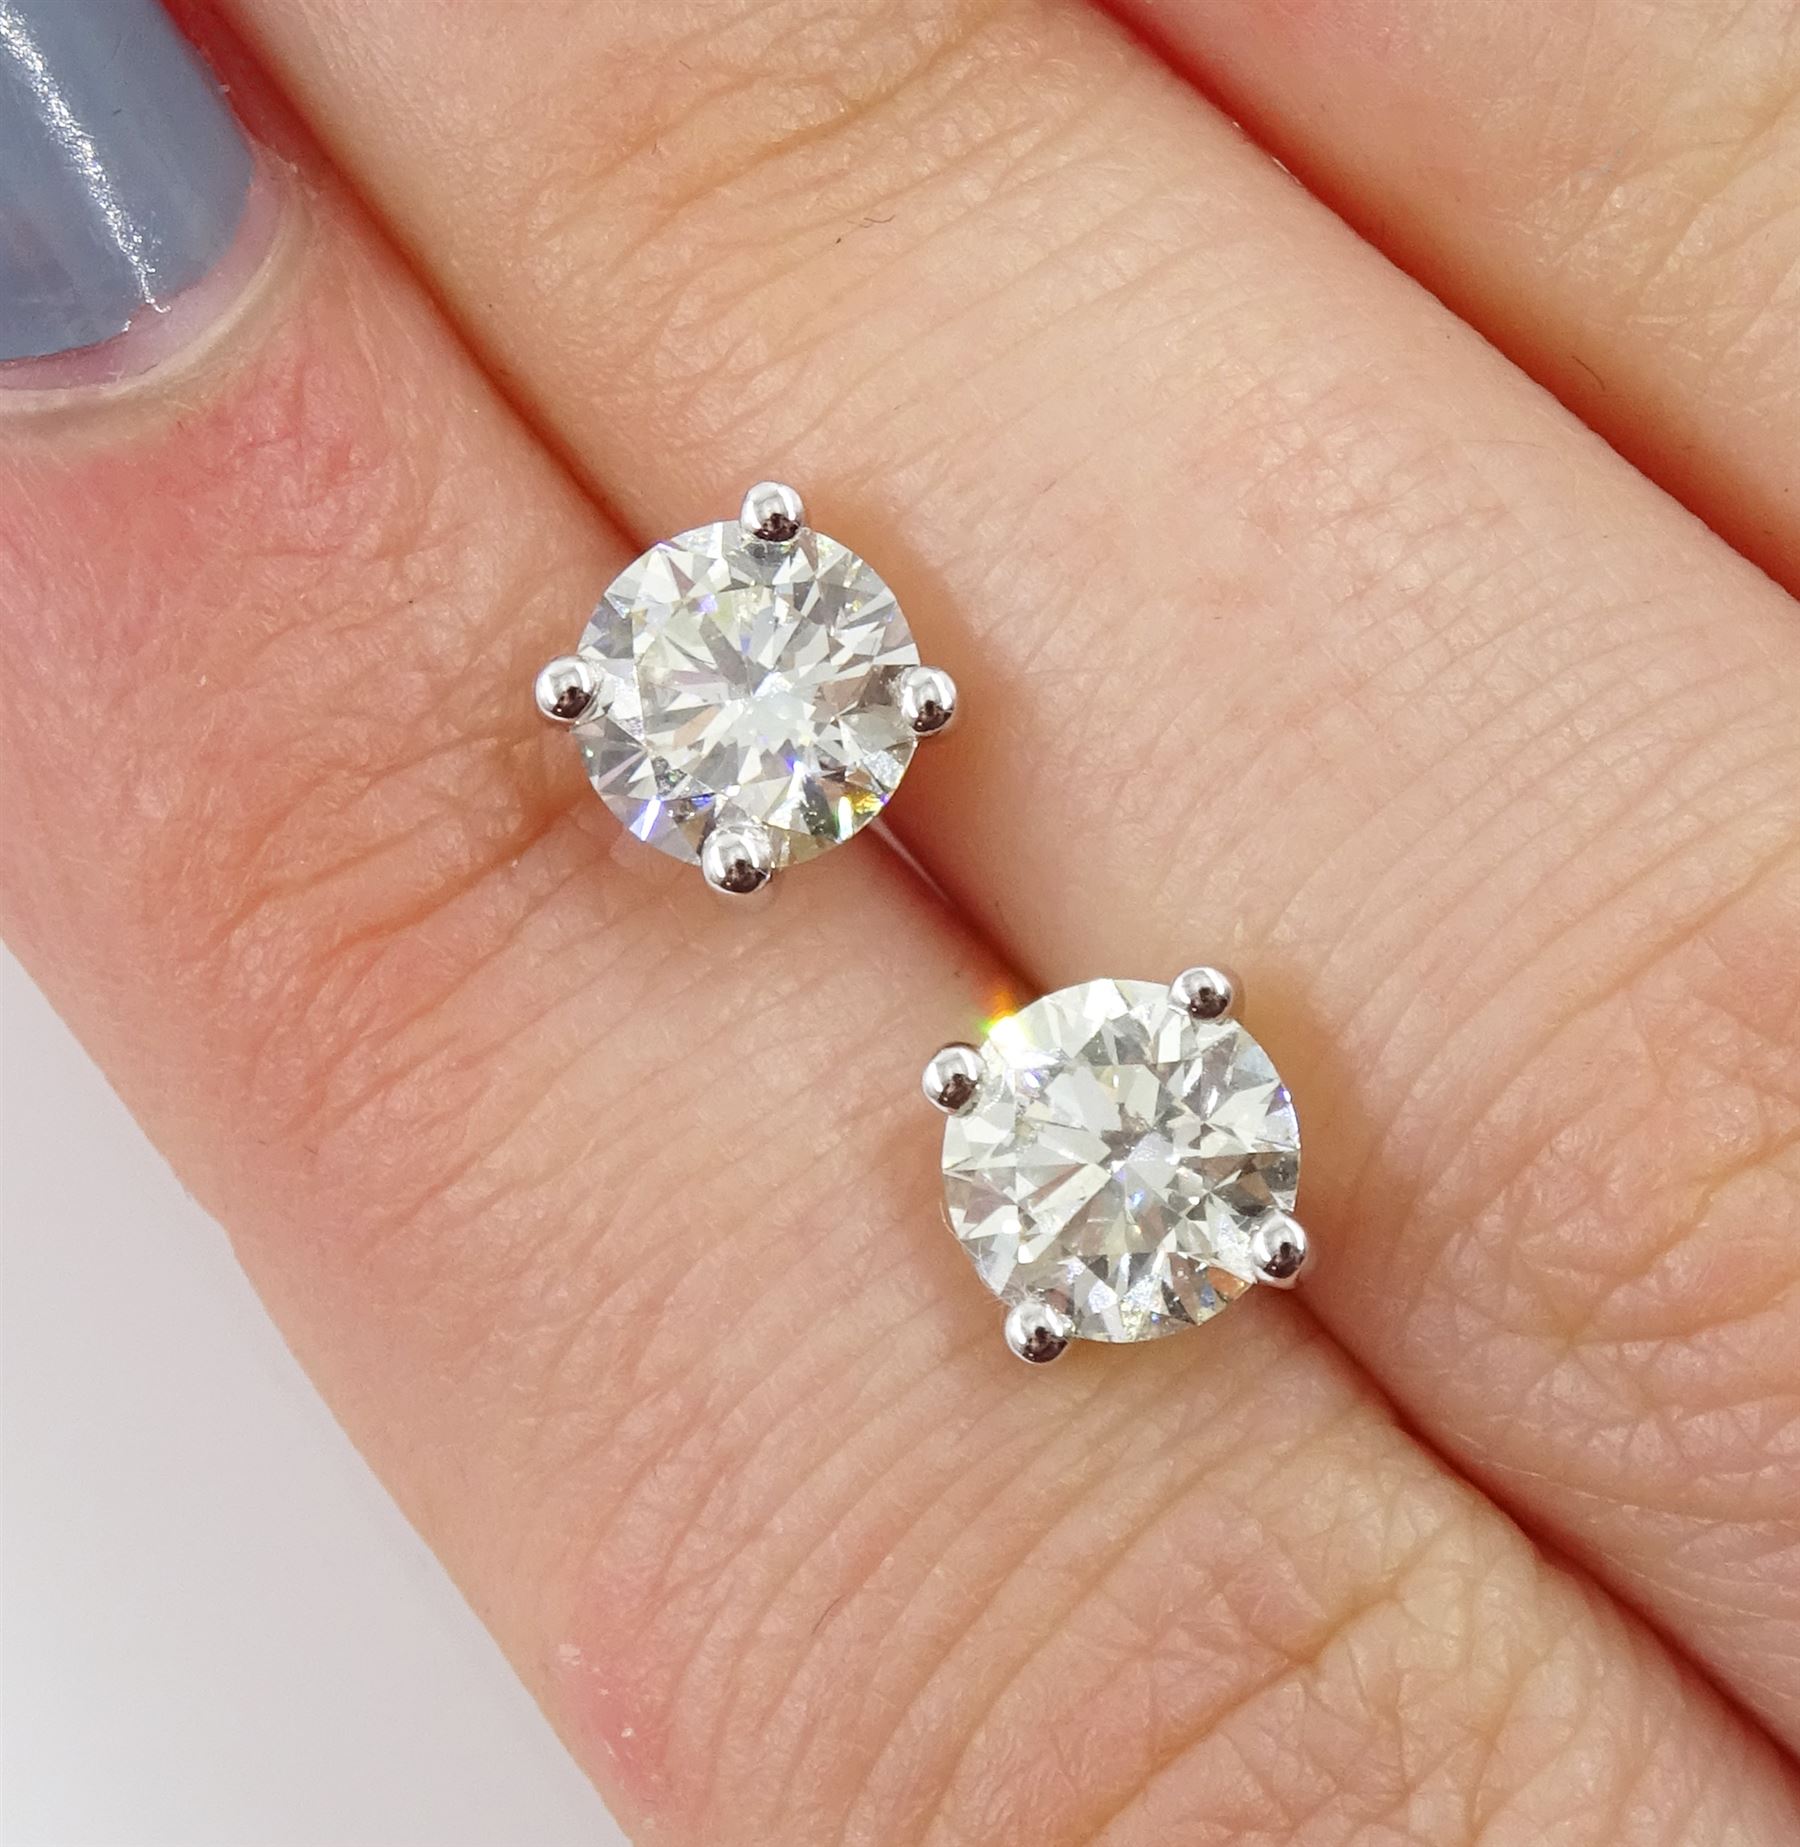 Pair of 18ct white gold brilliant cut diamond stud earrings - Image 3 of 3